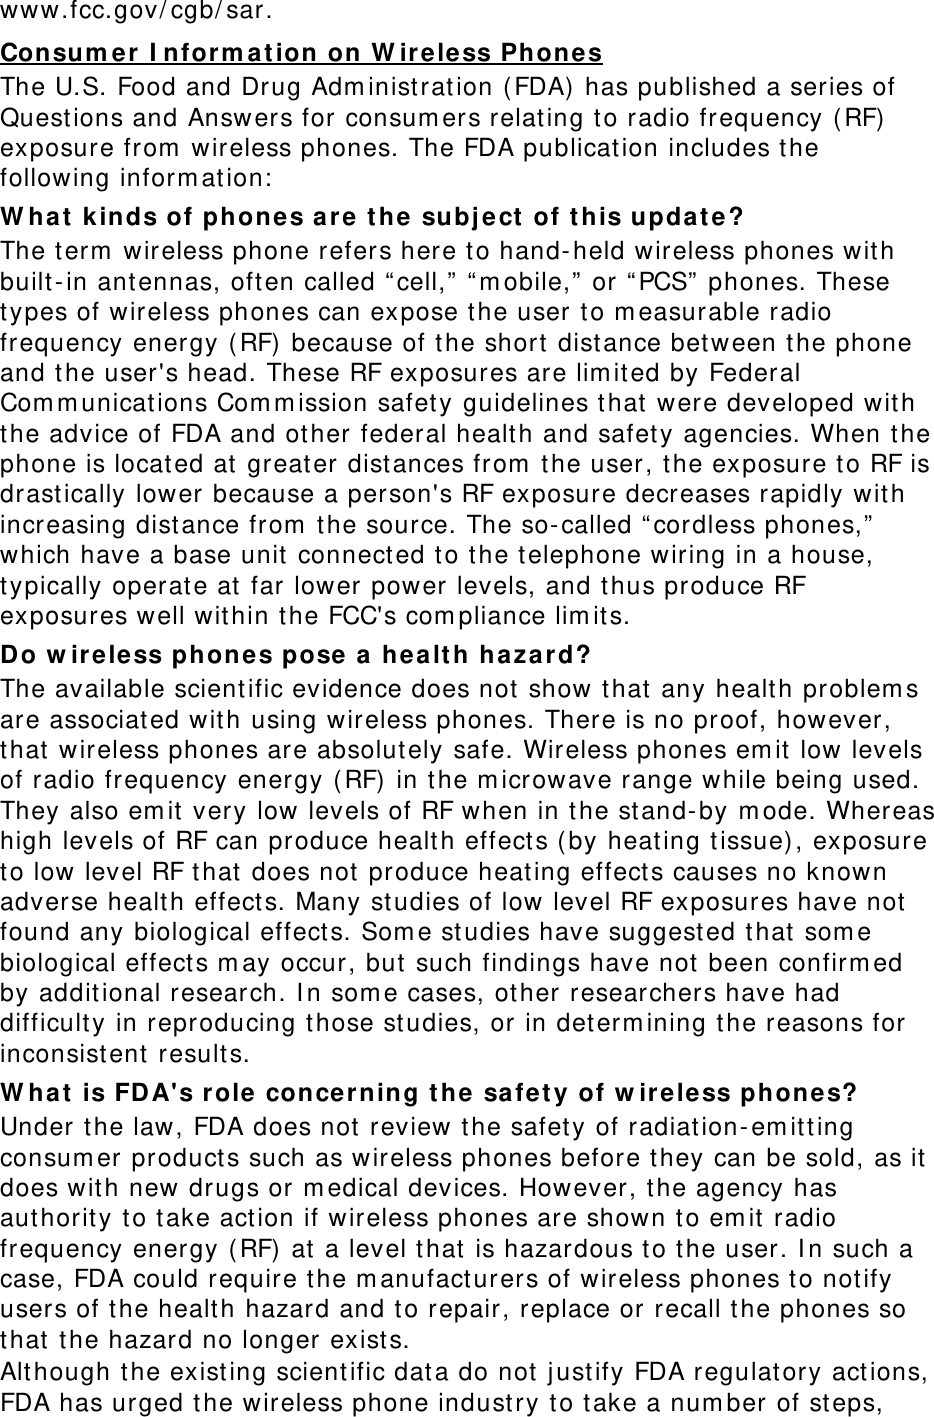 www.fcc.gov/ cgb/ sar. The U.S. Food and Dr ug Adm inistrat ion ( FDA)  has published a series of Questions and Answ ers for consum ers relat ing t o radio frequency ( RF)  exposure from  wireless phones. The FDA publicat ion includes t he following inform at ion:  Consu m er I nform a t ion on W ireless Phones W hat  k inds of ph ones a re t he subj ect  of t his updat e? The term  wireless phone refers here t o hand-held wireless phones wit h built-in antennas, oft en called “ cell,”  “ m obile,”  or “ PCS”  phones. These types of wireless phones can expose t he user to m easurable radio frequency energy ( RF)  because of t he short  dist ance between t he phone and t he user&apos;s head. These RF exposures are lim ited by Federal Com m unicat ions Com m ission safety guidelines t hat  were developed with the advice of FDA and ot her federal health and safety agencies. When t he phone is locat ed at  great er dist ances fr om  the user, t he exposure t o RF is drastically lower because a person&apos;s RF exposure decreases rapidly with increasing dist ance from  t he source. The so-called “ cordless phones,”  which have a base unit  connect ed t o t he t elephone wiring in a house, typically operat e at far  lower  power levels, and t hus produce RF exposures well within the FCC&apos;s com pliance lim it s. Do w ireless phones pose a  he a lt h h a za r d? The available scient ific evidence does not show t hat any healt h problem s are associat ed w it h using wireless phones. There is no proof, however, that  w ir eless phones are absolut ely safe. Wireless phones em it  low levels of radio frequency energy ( RF)  in t he m icrowave range while being used. They also em it very  low levels of RF when in t he st and-by m ode. Whereas high levels of RF can produce healt h effect s ( by heating t issue) , exposure to low level RF t hat does not produce heat ing effect s causes no known adverse health effect s. Many studies of low level RF exposures have not  found any biological effect s. Som e st udies have suggested t hat  som e biological effect s m ay occur, but  such findings have not  been confirm ed by addit ional research. I n som e cases, other researchers have had difficult y in reproducing t hose st udies, or in det erm ining t he reasons for inconsist ent results. W hat  is FDA&apos;s role concer ning t he sa fet y of w irele ss ph ones? Under t he law, FDA does not review t he safety of radiat ion-em it t ing consum er product s such as wireless phones before they can be sold, as it does wit h new drugs or m edical dev ices. However, t he agency has aut hority t o t ake act ion if wireless phones are shown to em it radio frequency energy ( RF)  at a level t hat  is hazardous t o t he user . I n such a case, FDA could require t he m anufact ur ers of wireless phones to not ify users of the healt h hazard and to repair, replace or recall t he phones so that  the hazard no longer exist s. Alt hough t he exist ing scient ific dat a do not j ustify FDA regulat ory act ions, FDA has urged t he wireless phone industry t o take a num ber  of st eps, 